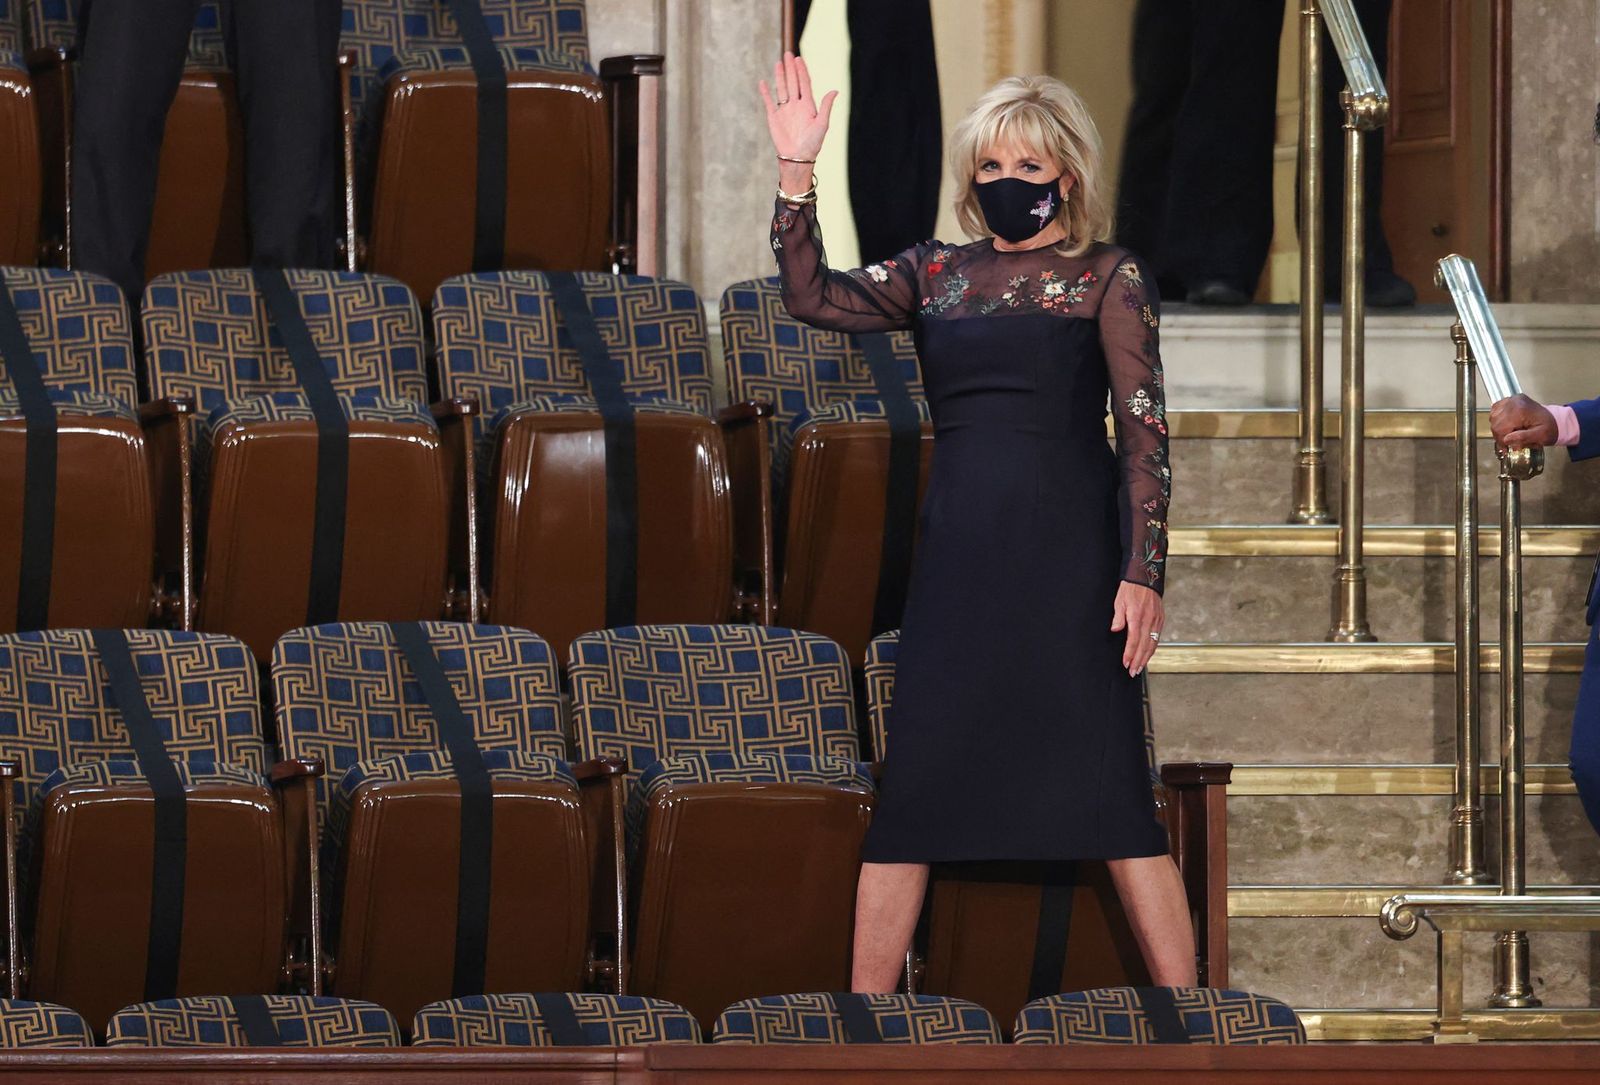 Jill Biden waves as she arrives forPresident Joe Biden's address to joint session of the Congress at the US Capitol in Washington, DC, on April 28, 2021. | Getty Images